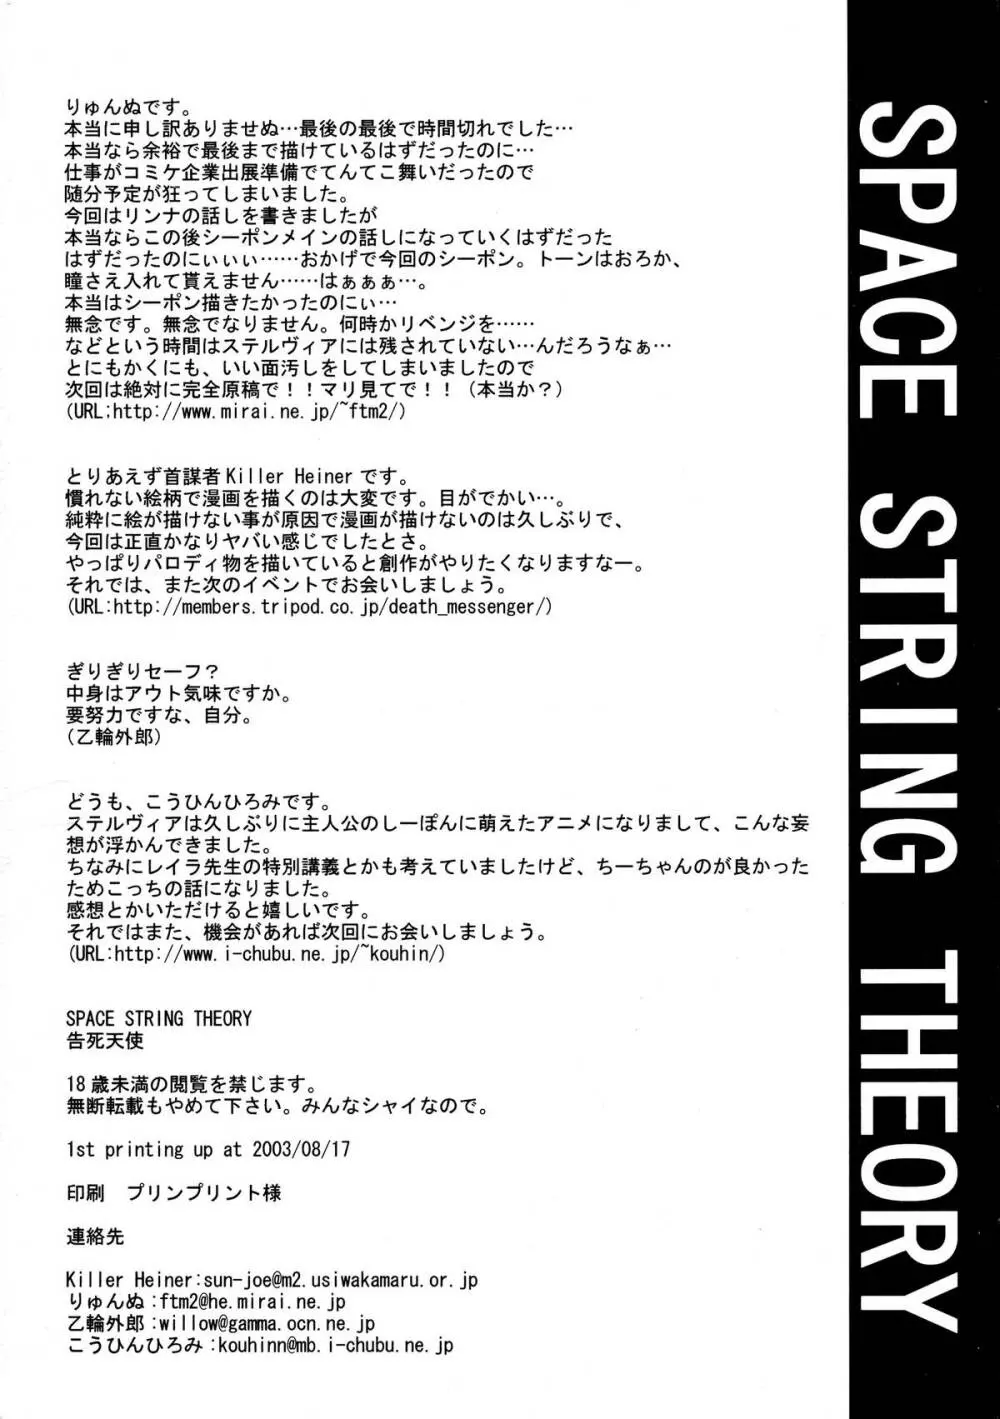 SPACE STRING THEORY 30ページ